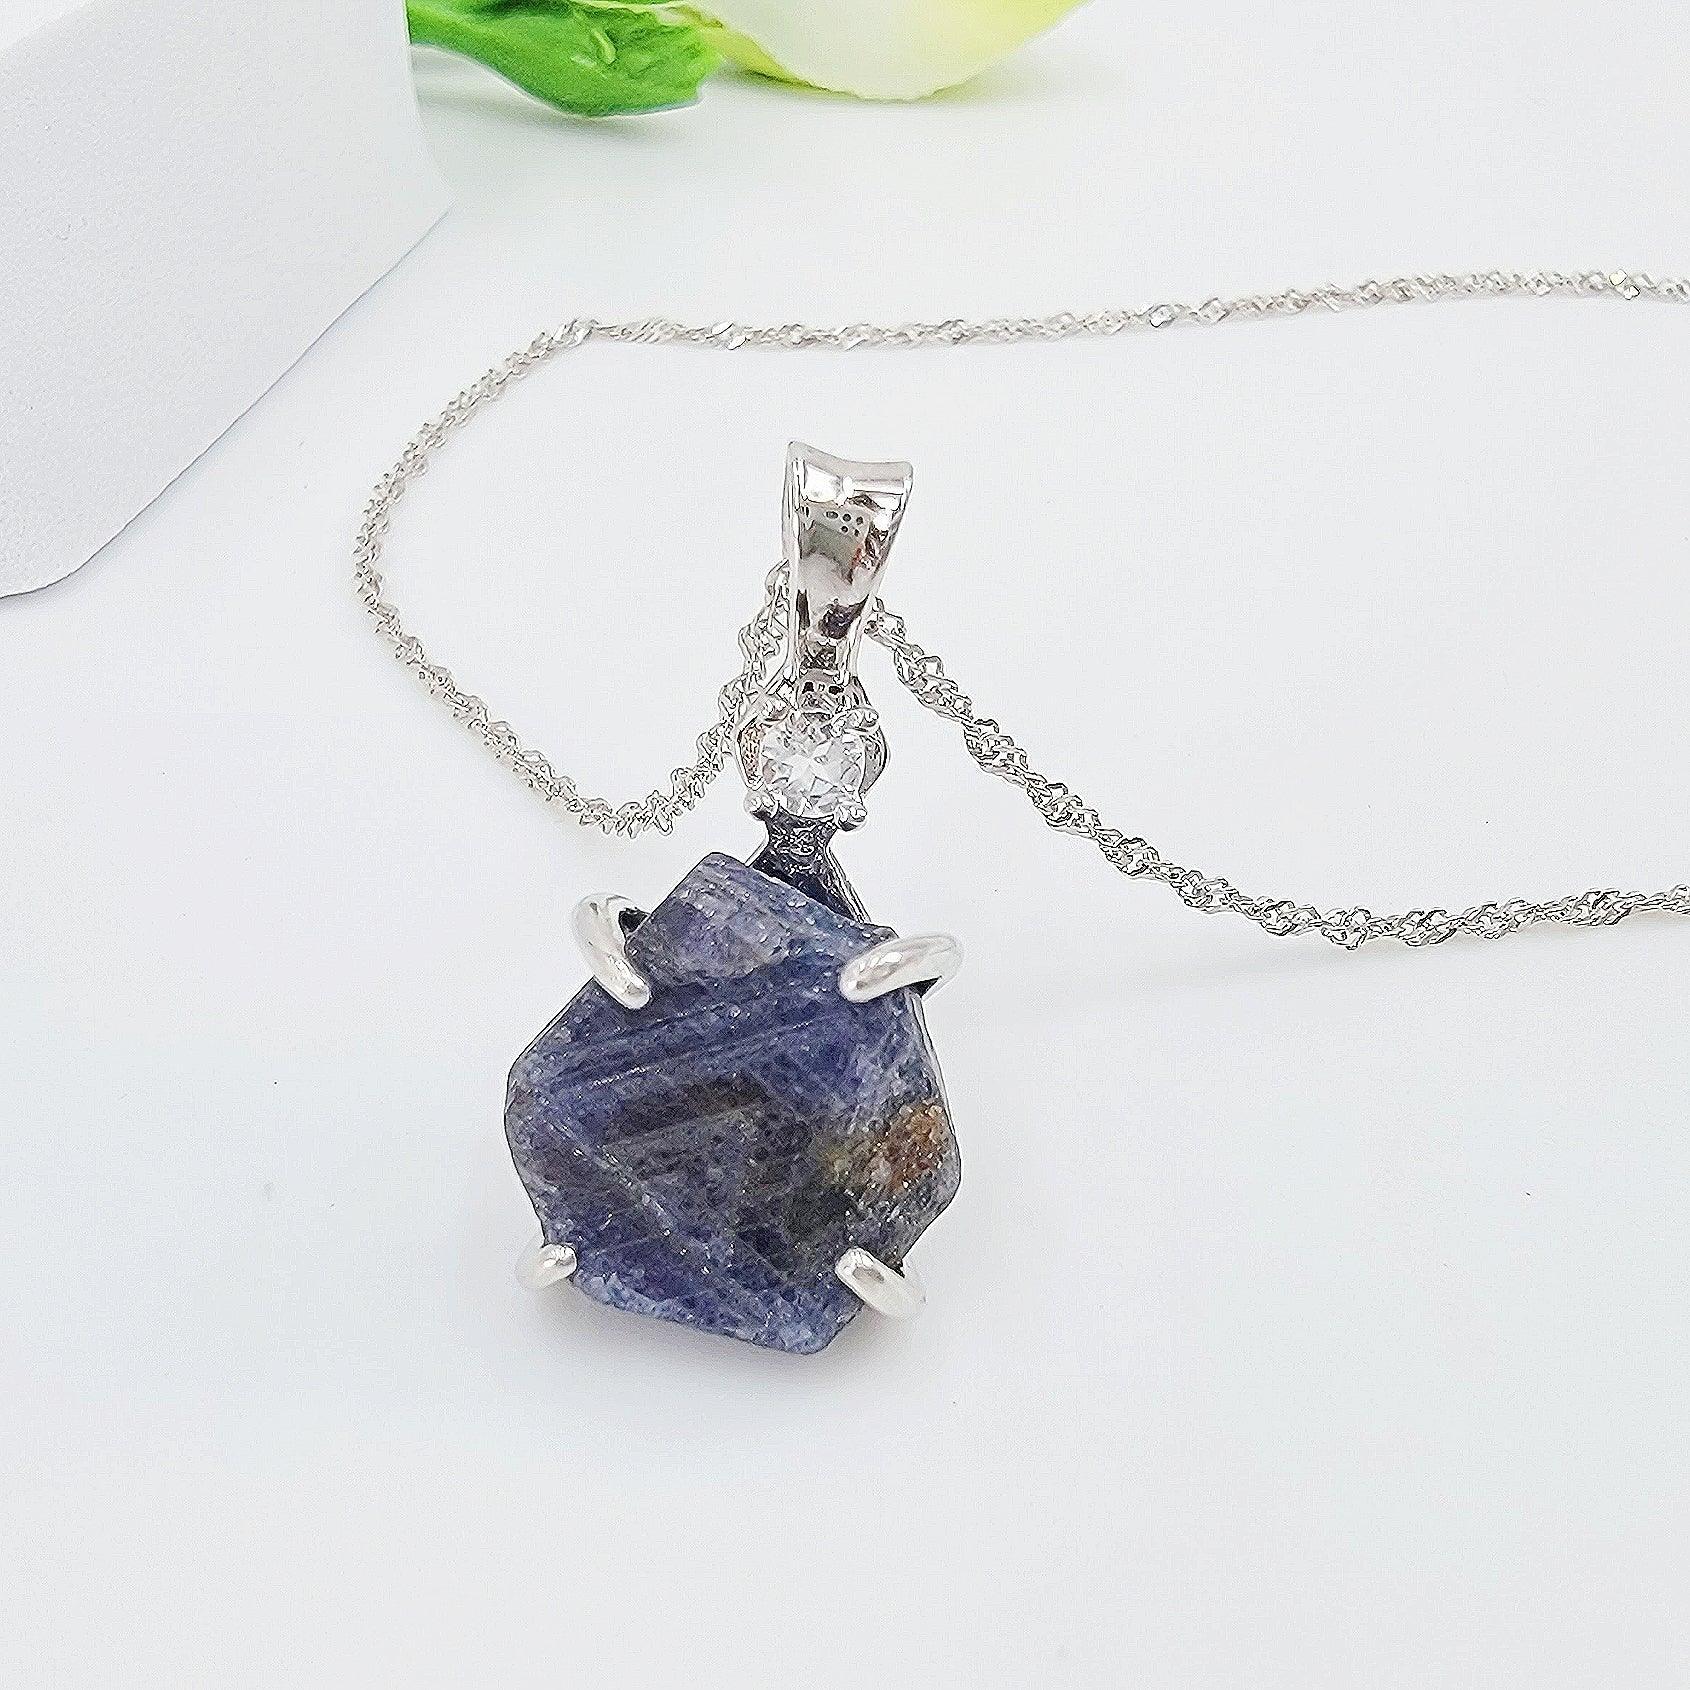 Raw Sapphire Necklace Sterling Silver - Uniquelan Jewelry